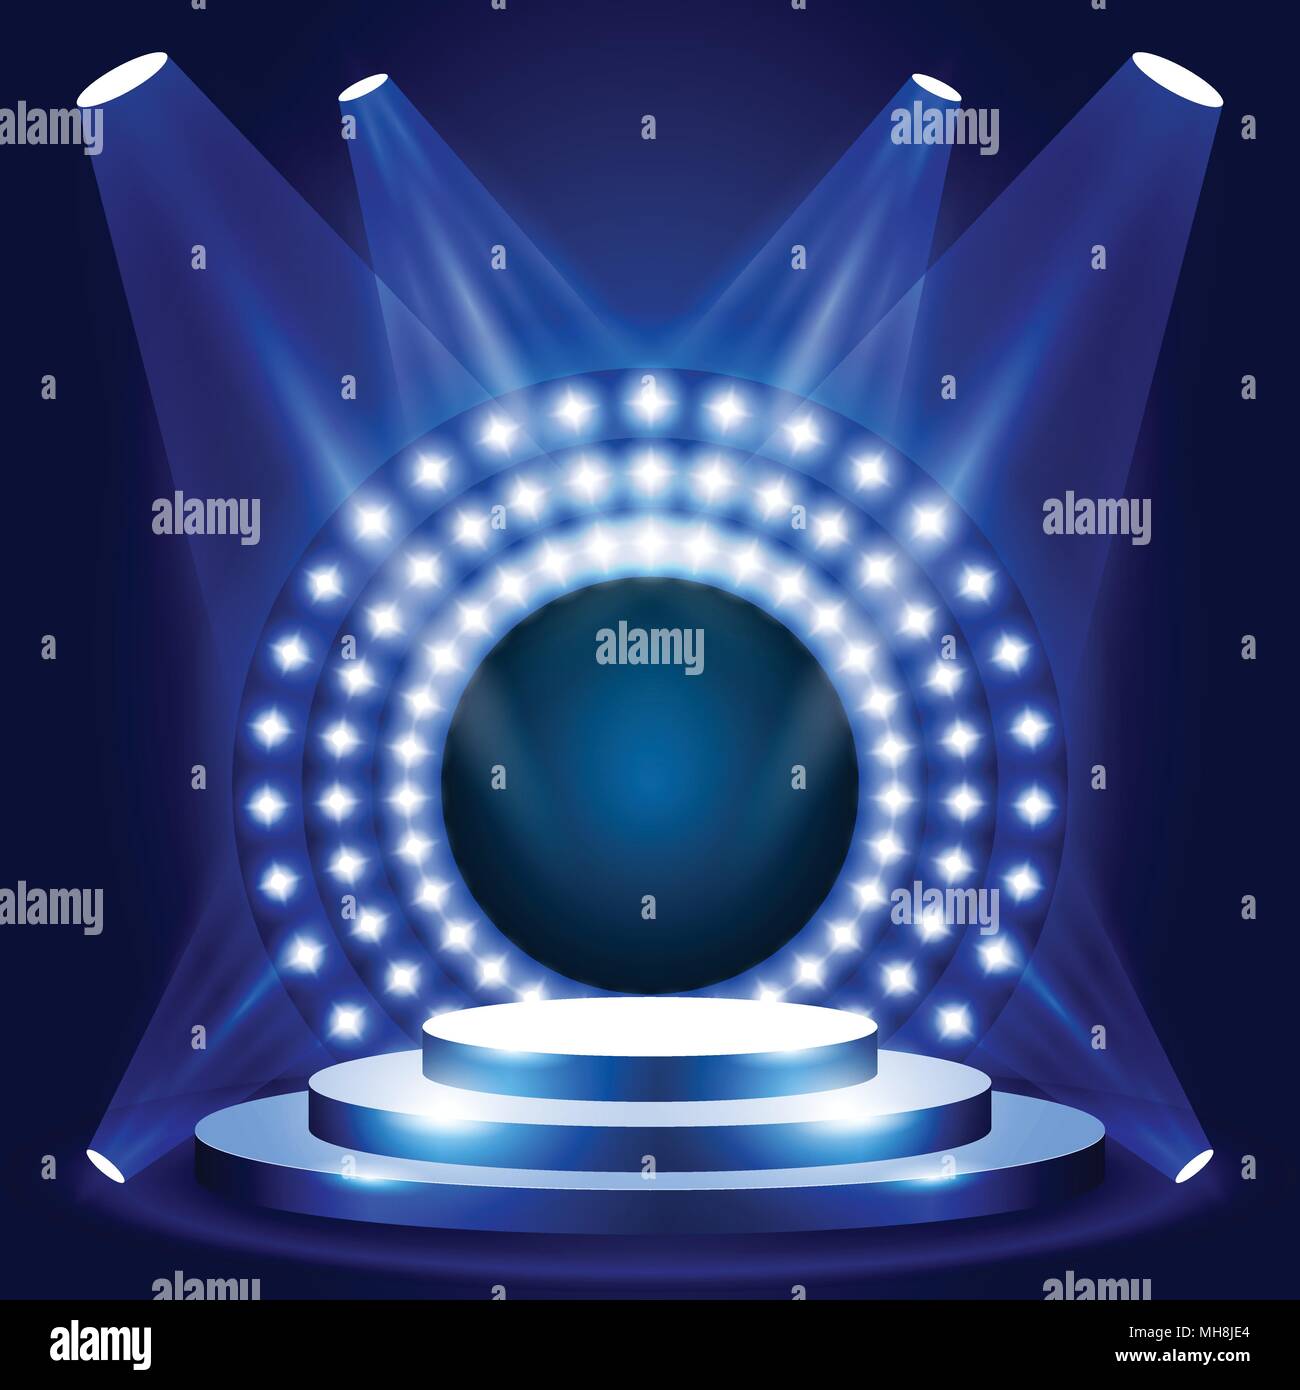 TV show scene with circle of lights - stage or podium for award ceremony, show podium Stock Vector